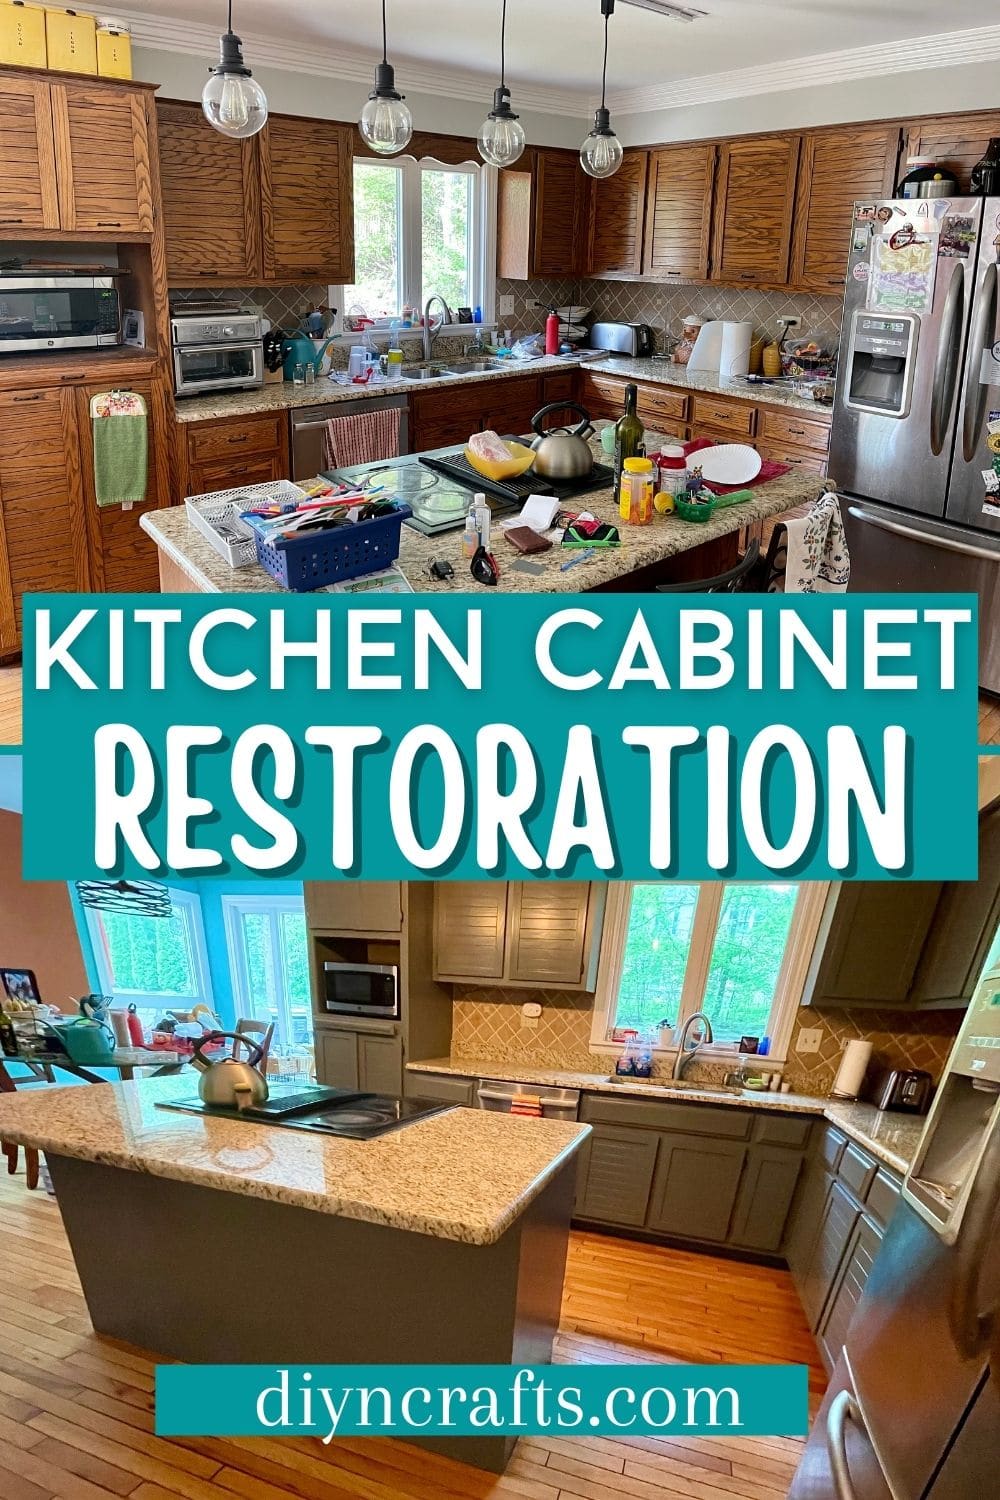 Collage image for kitchen restoration with before and after images